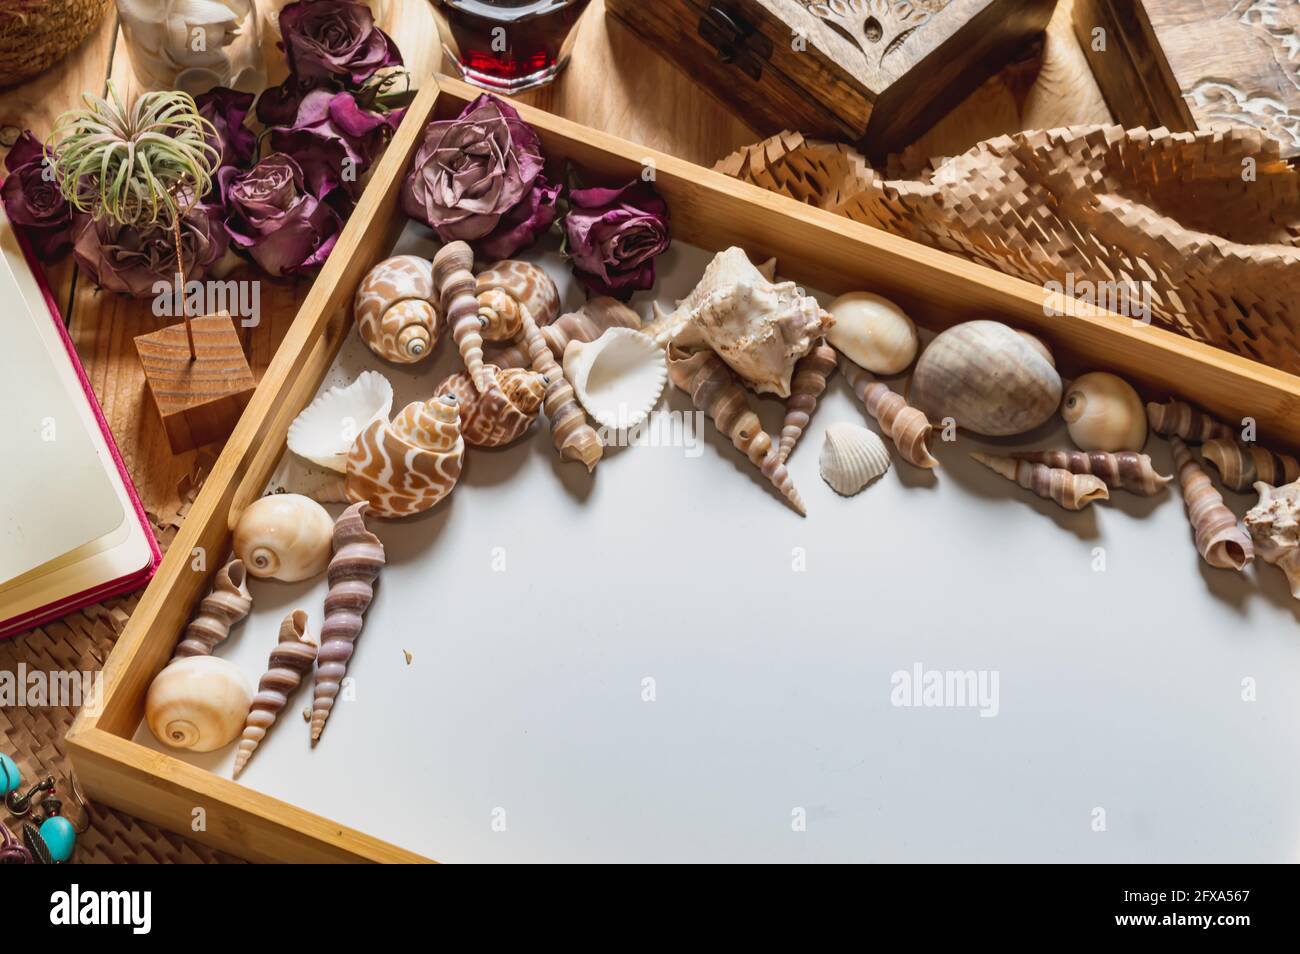 Image of a wooden tray with seashells and dried pink roses on a wooden table Stock Photo